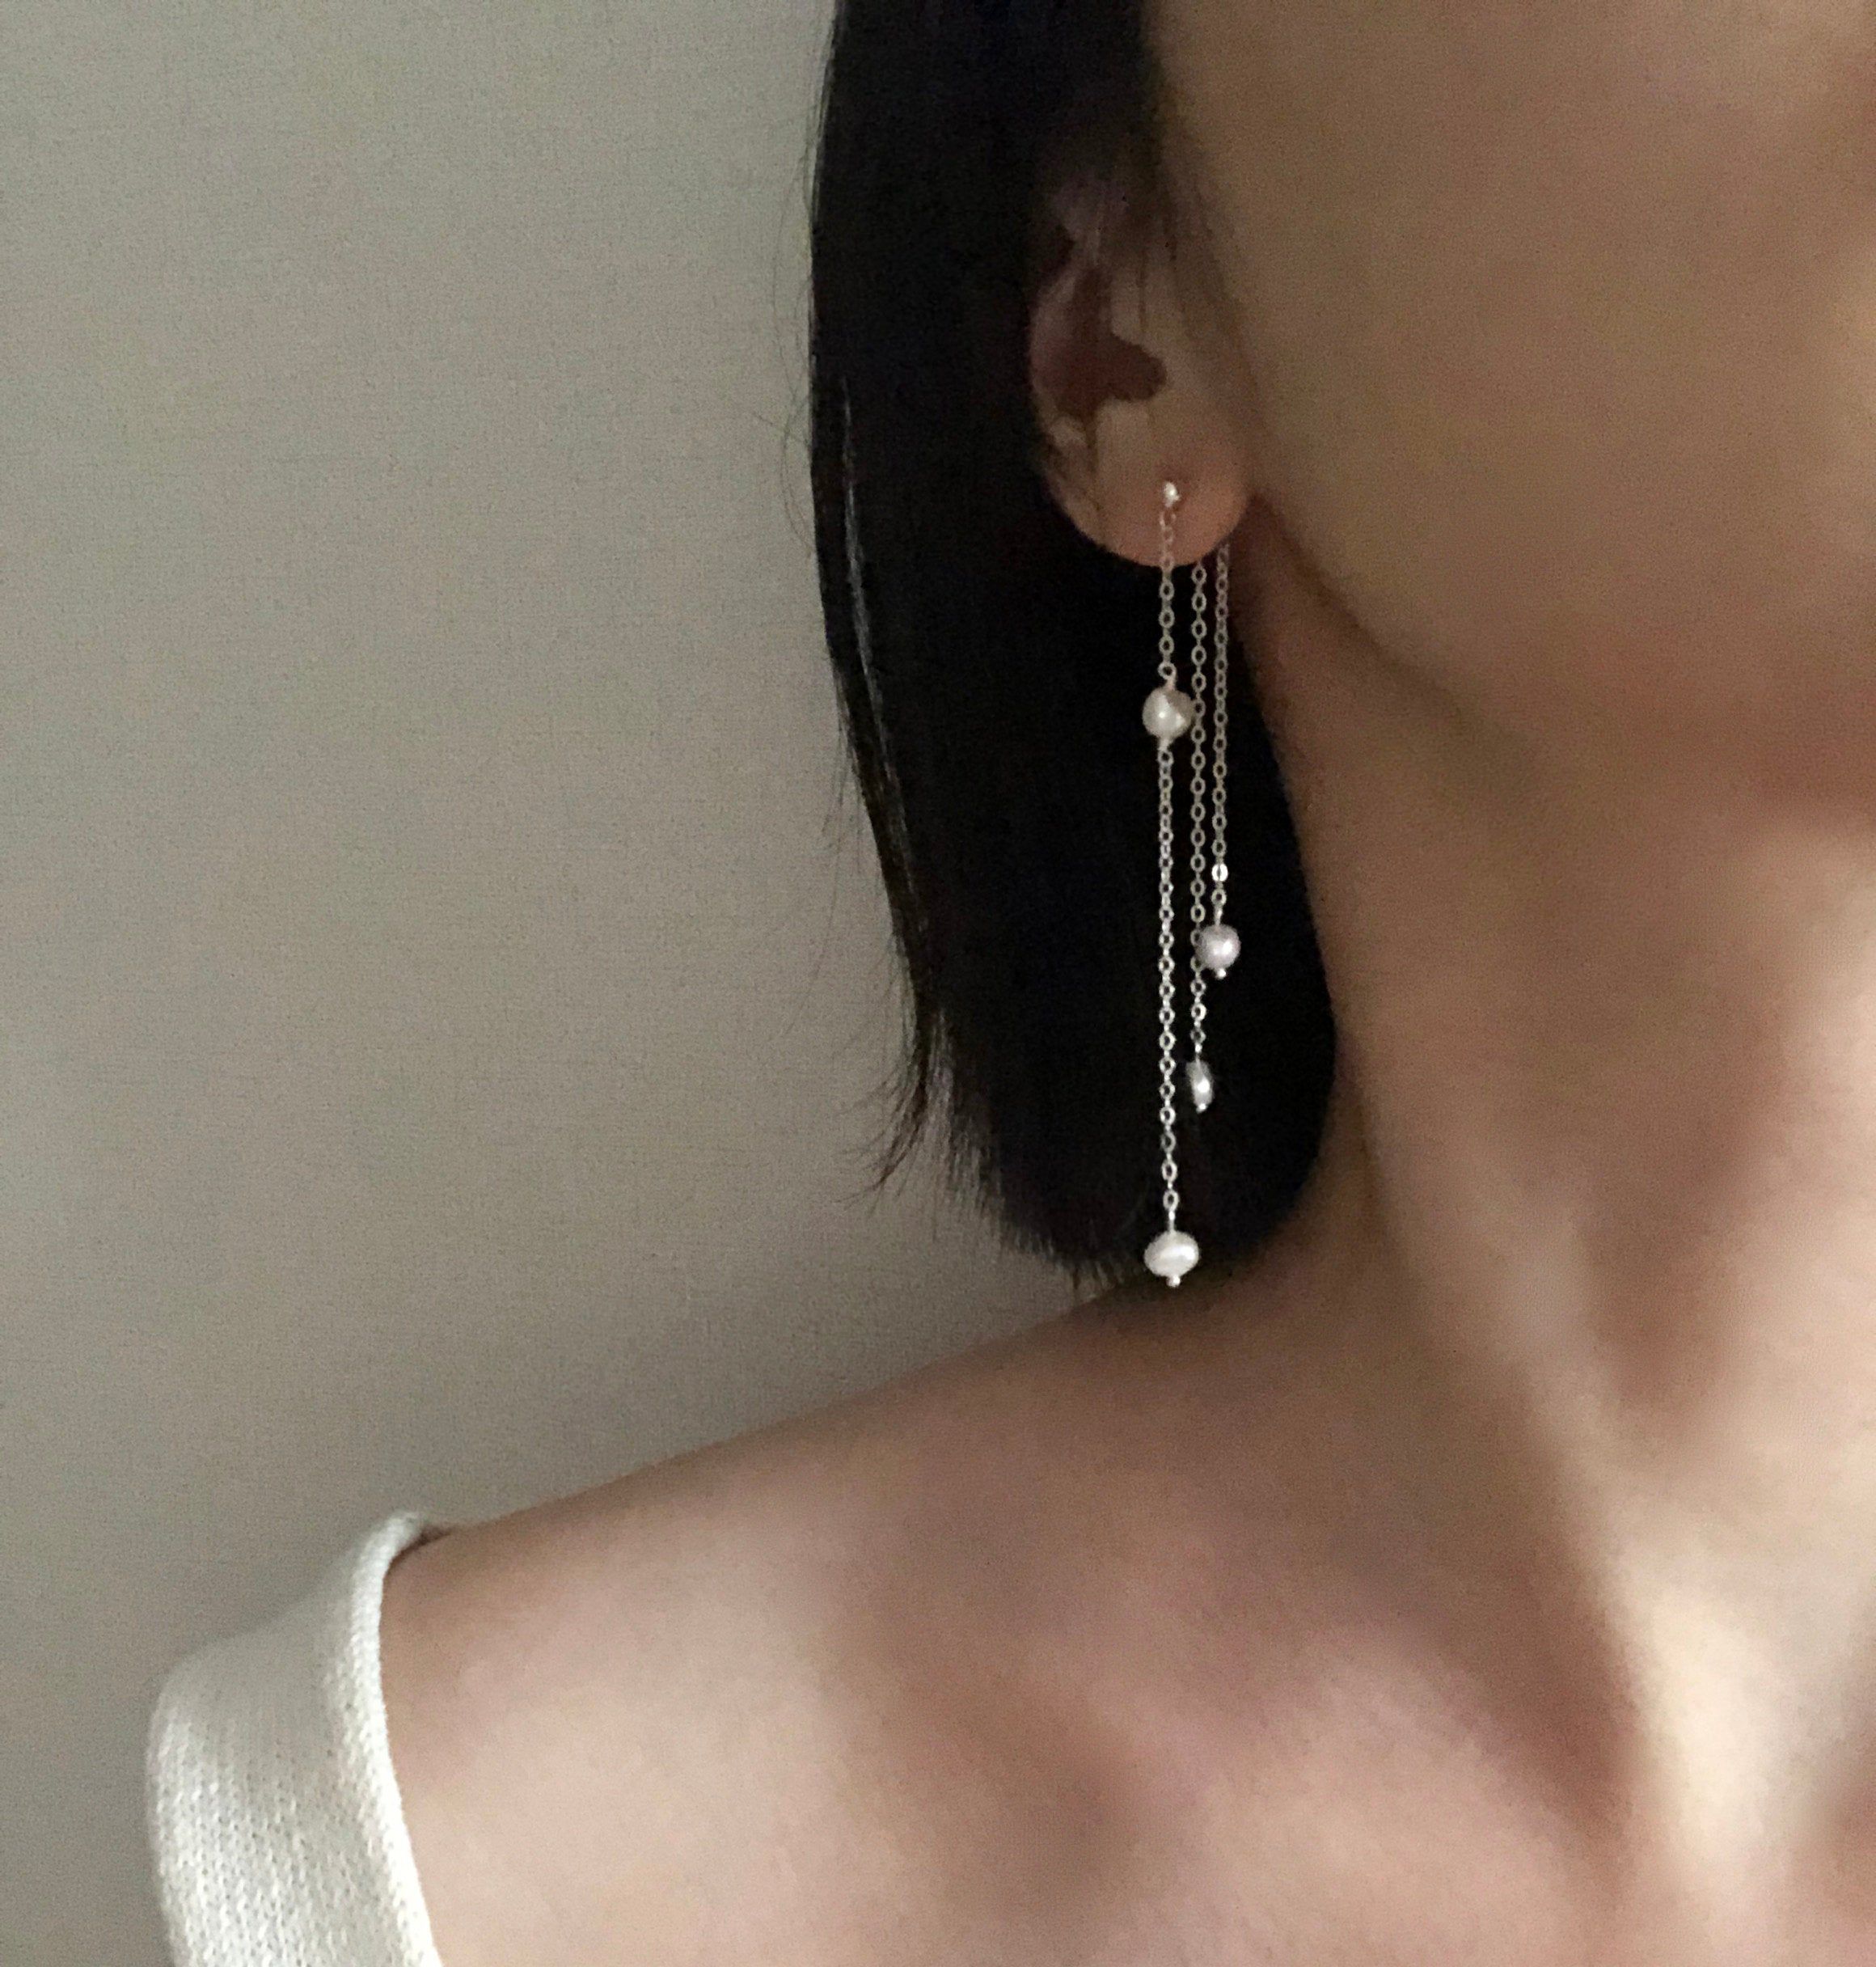 Stunning Silver Dangle Earrings to
Elevate Your Look